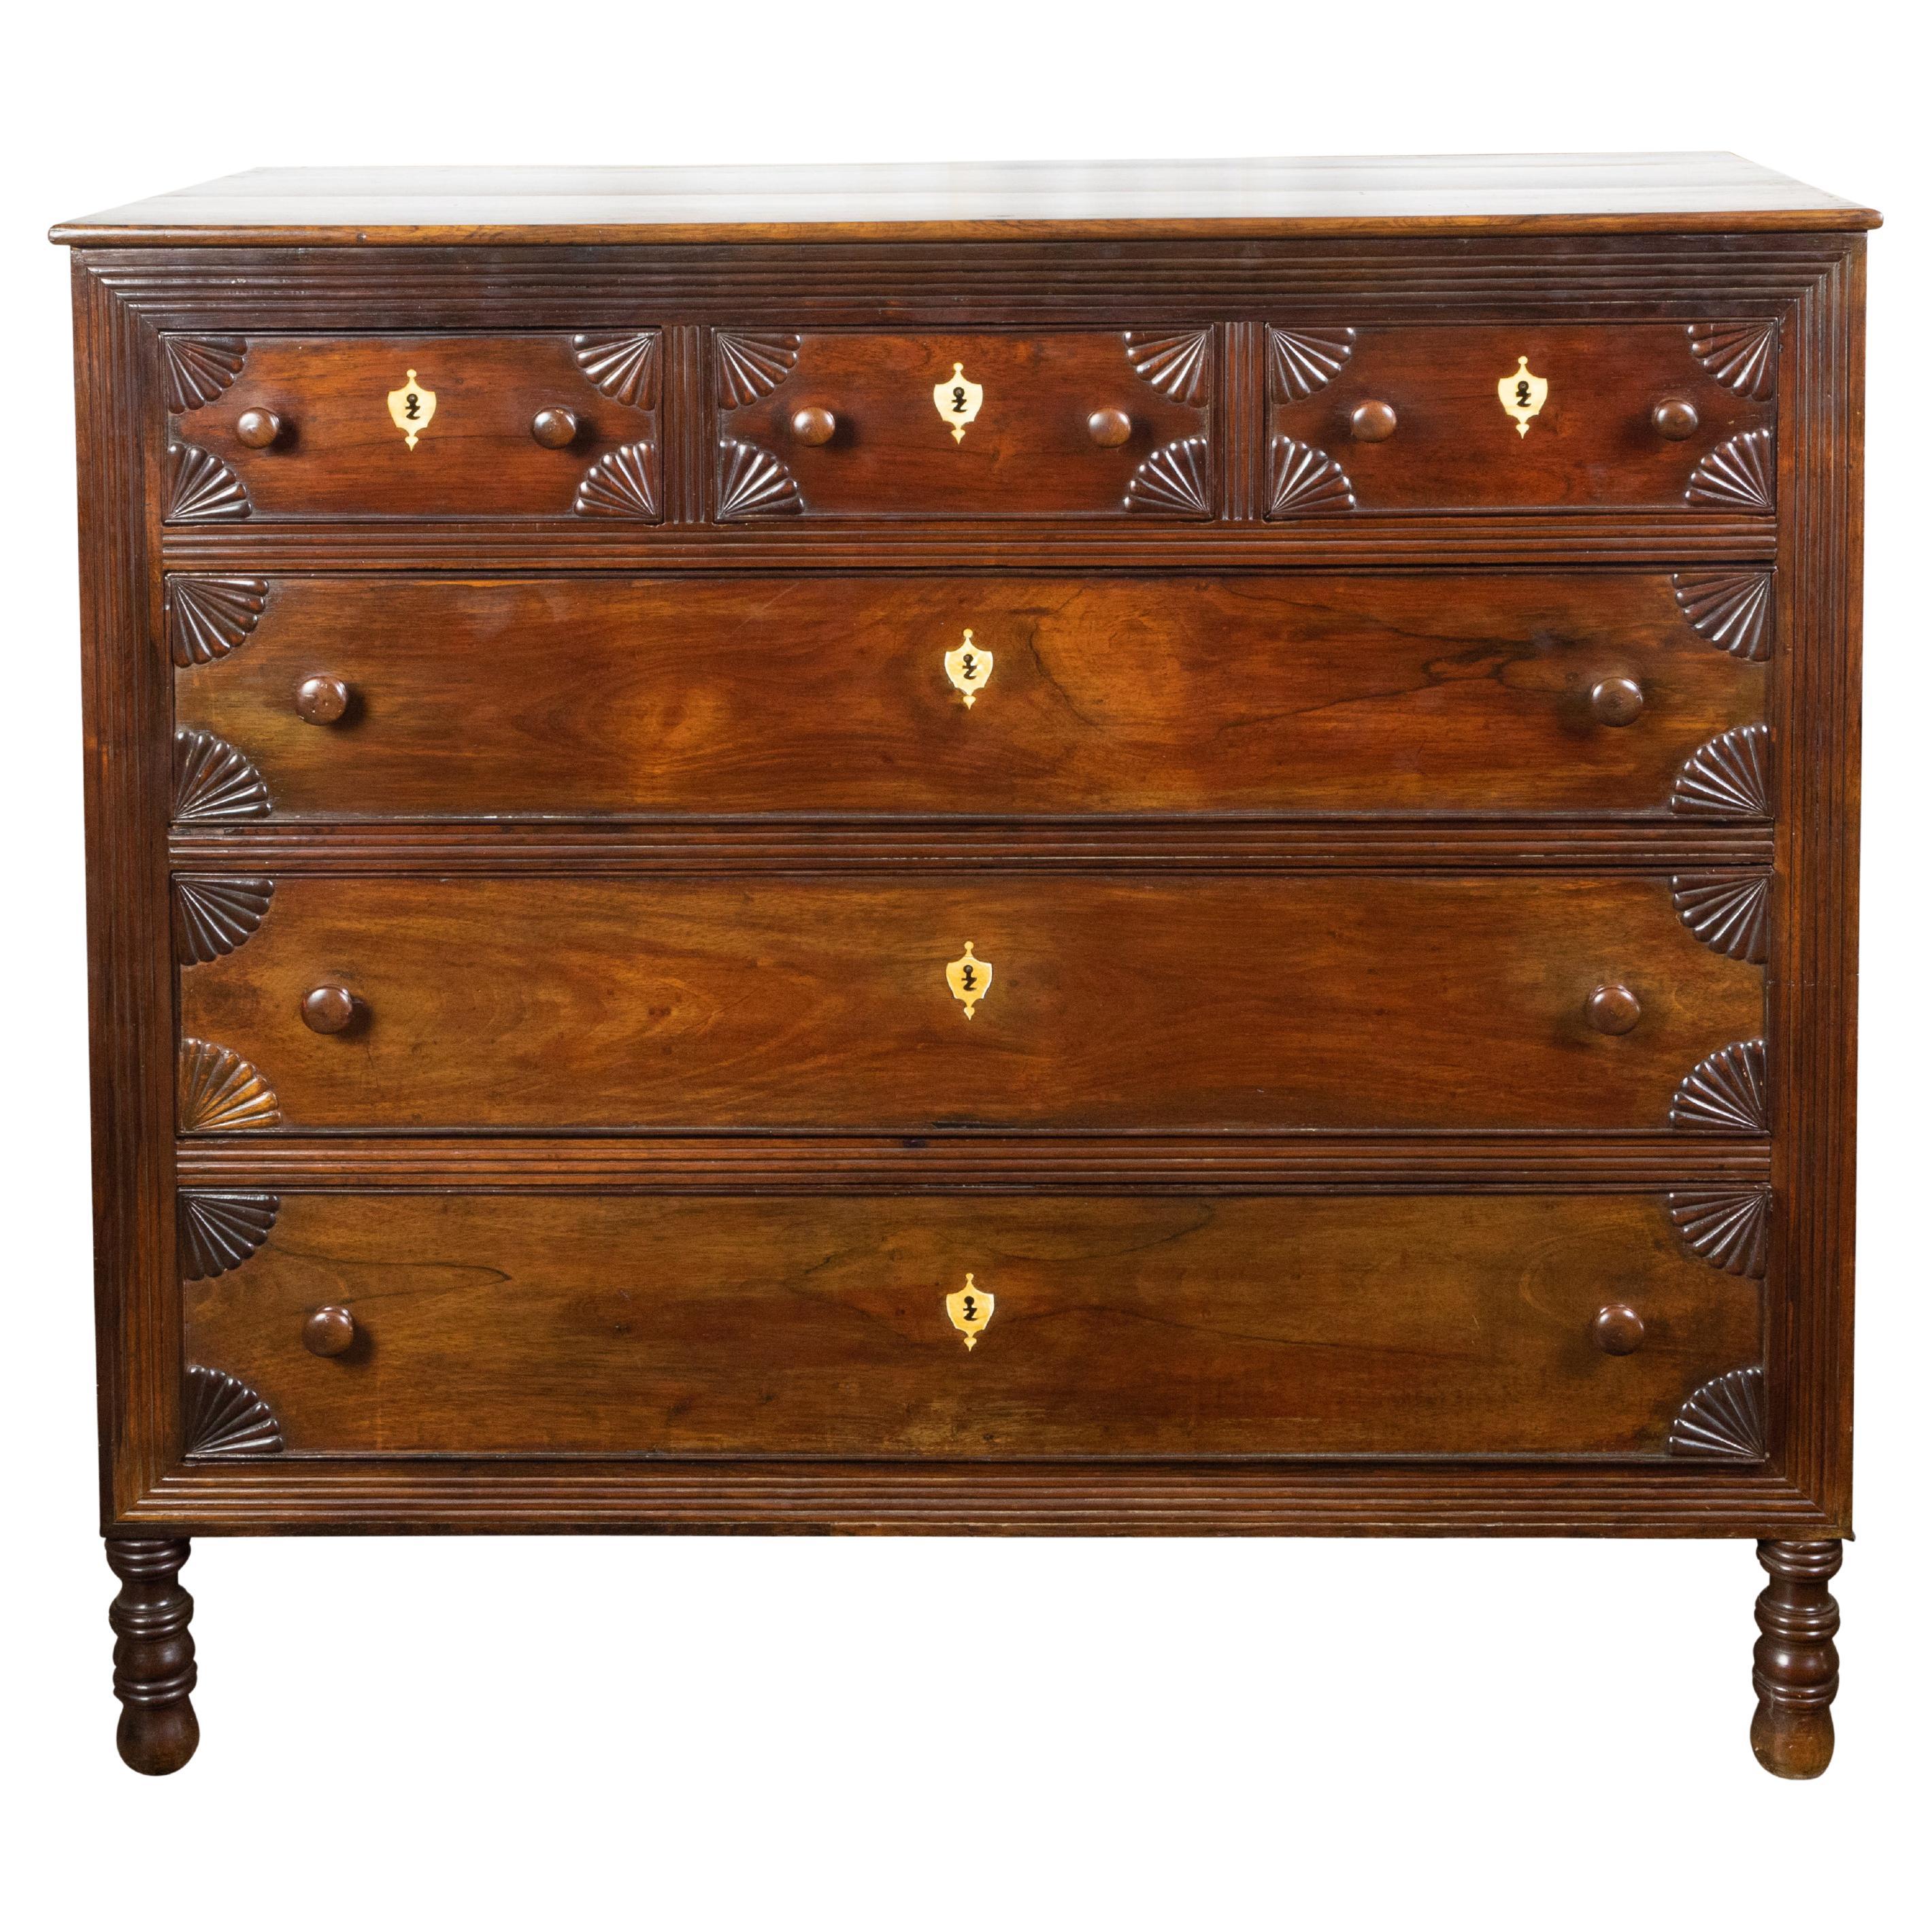 Anglo-Indian 1800s Six-Drawer Chest with Radiating Fan Motifs and Bone Inlay